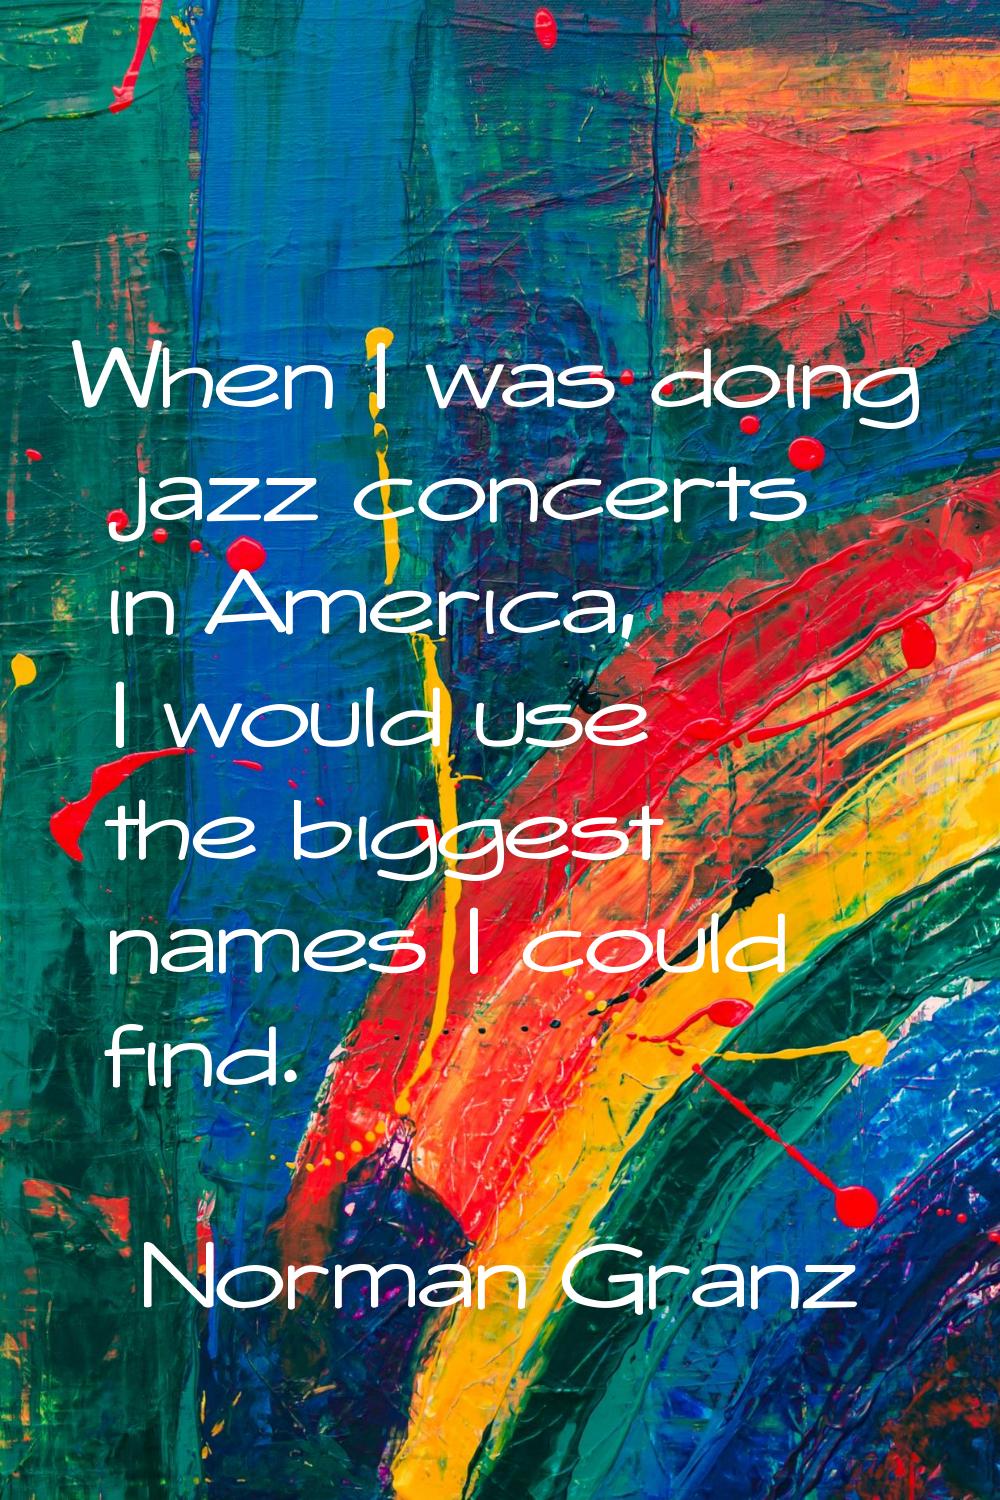 When I was doing jazz concerts in America, I would use the biggest names I could find.